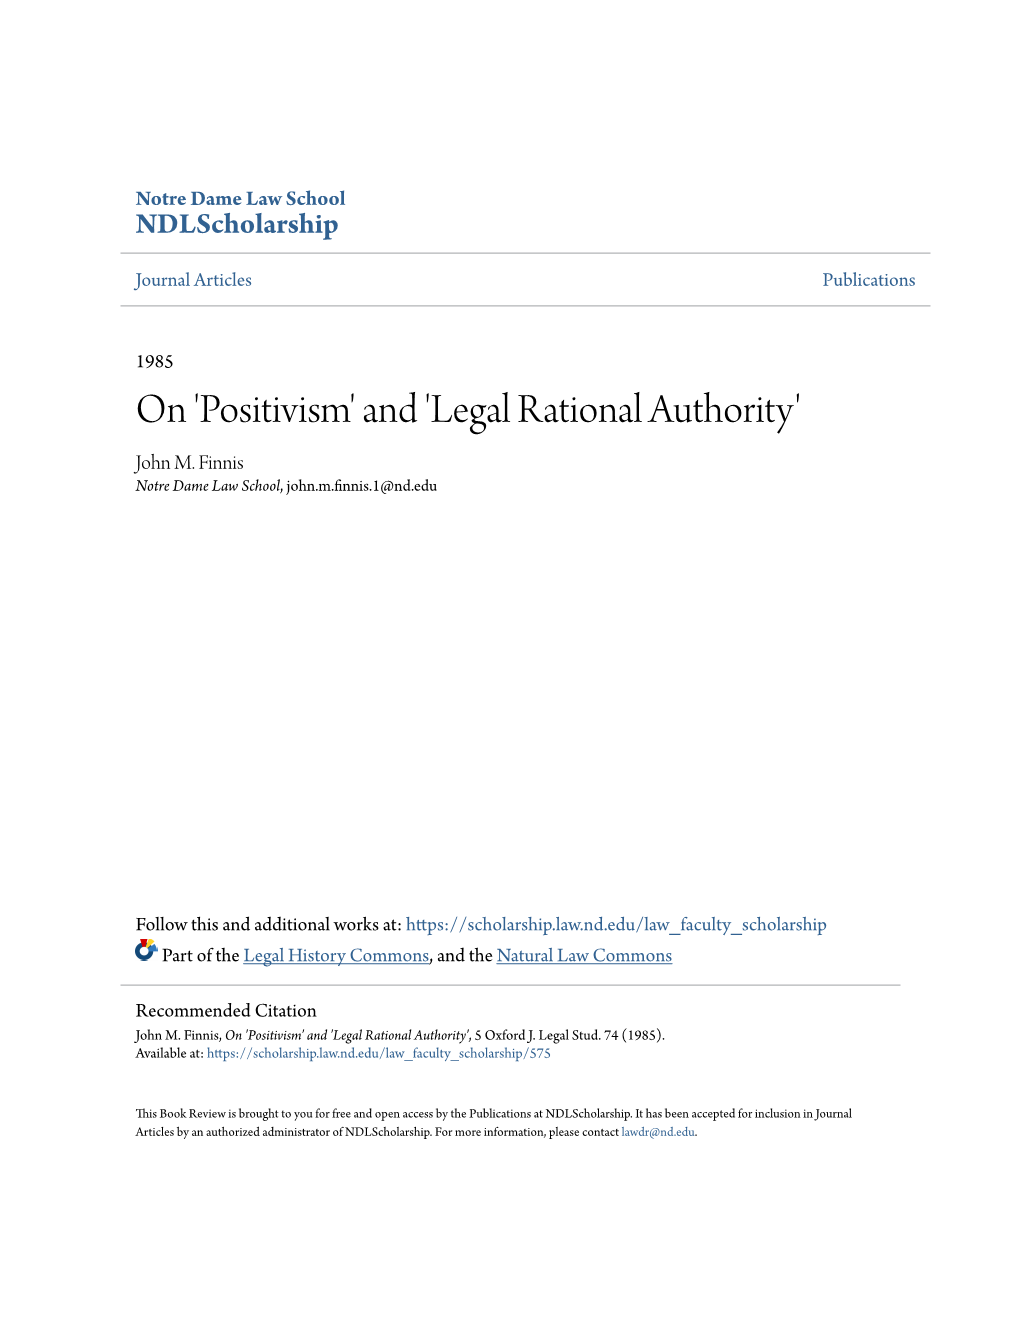 On 'Positivism' and 'Legal Rational Authority' John M